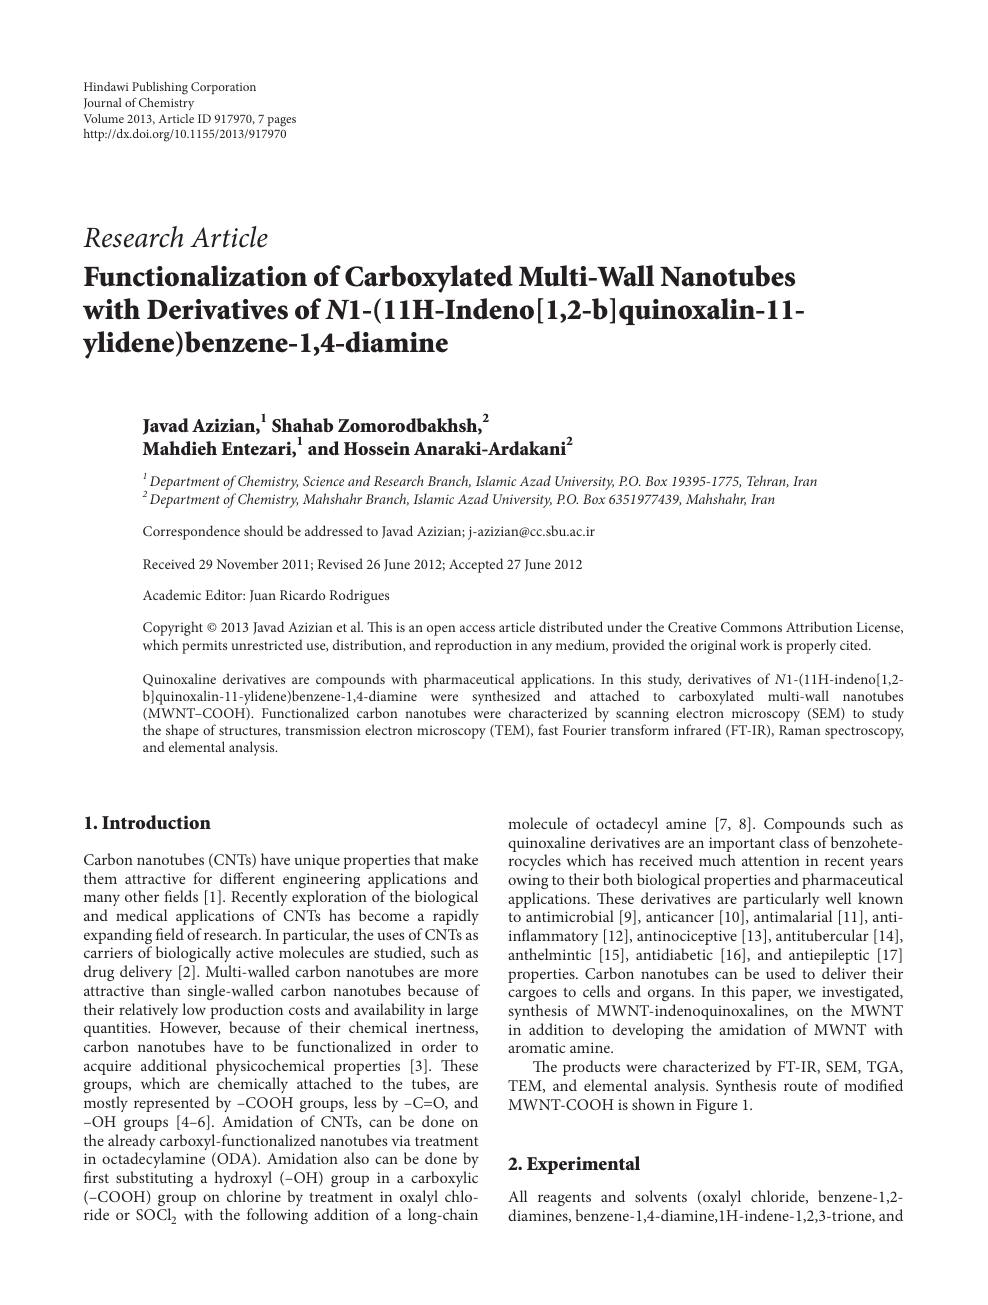 Functionalization Of Carboxylated Multi Wall Nanotubes With Derivatives Of N1 11h Indeno 1 2 B Quinoxalin 11 Ylidene Benzene 1 4 Diamine Topic Of Research Paper In Nano Technology Download Scholarly Article Pdf And Read For Free On Cyberleninka